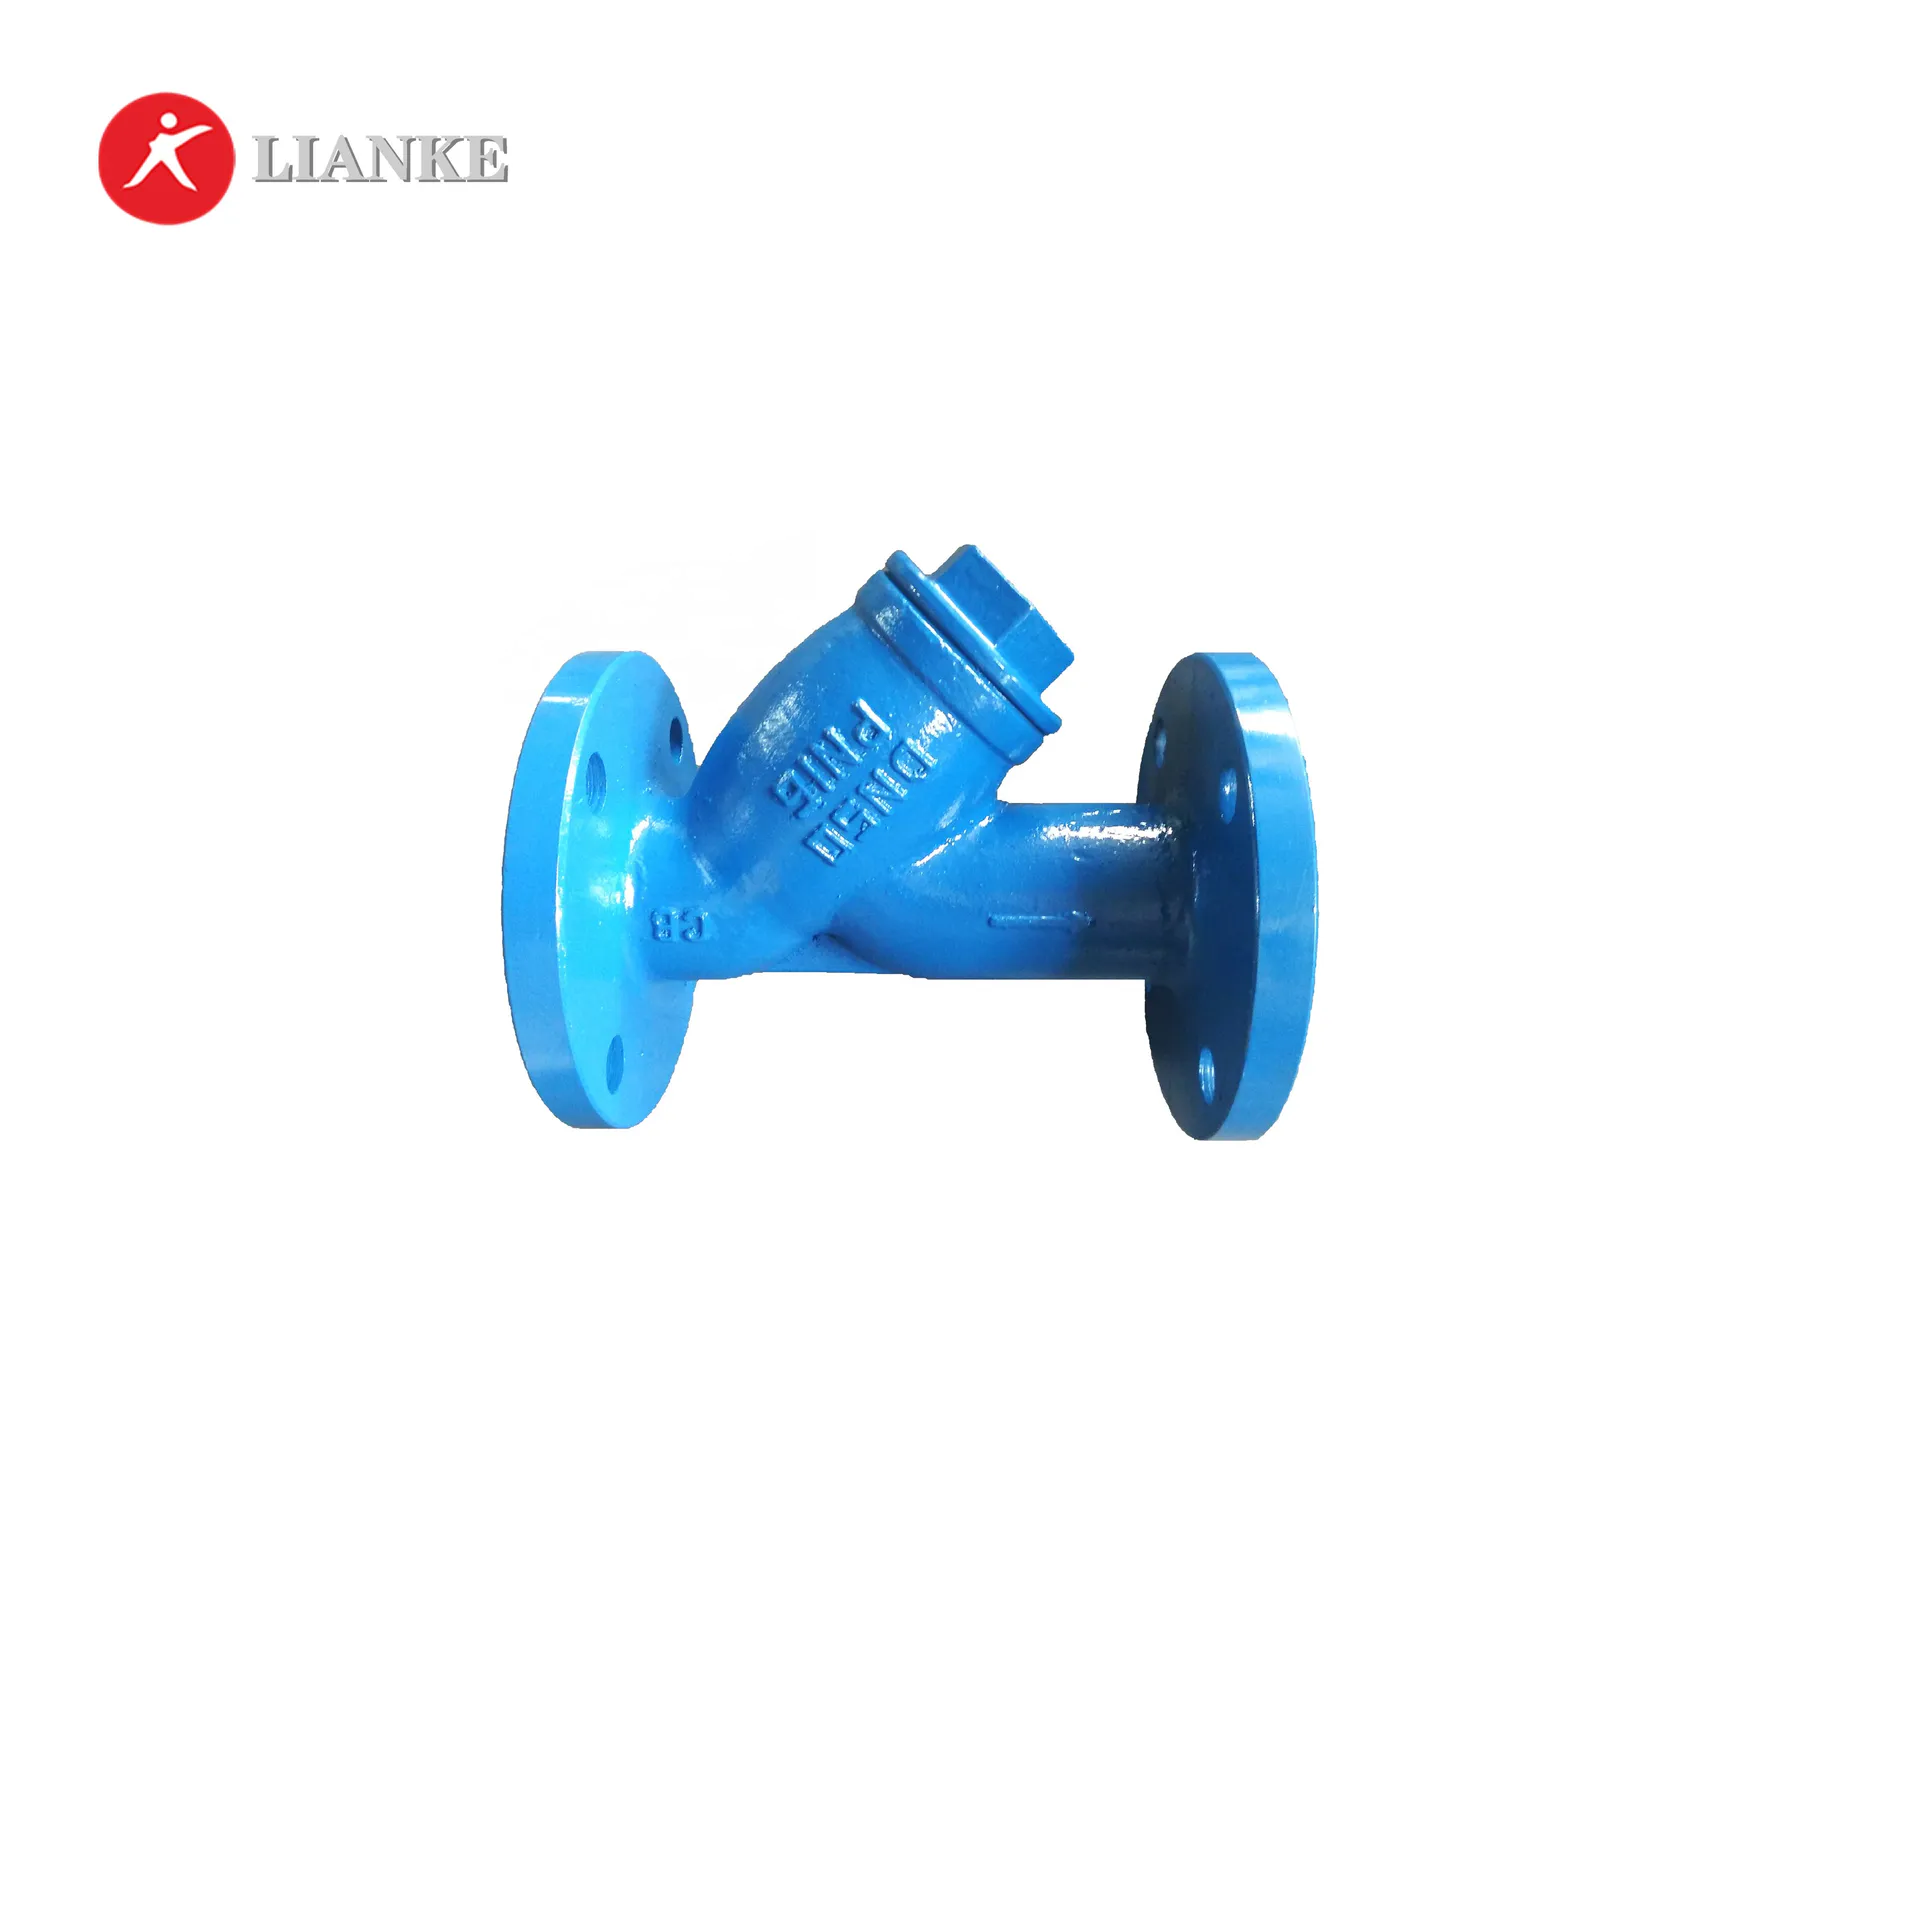 DN50 PN16 flanged connection WCB y type strainer